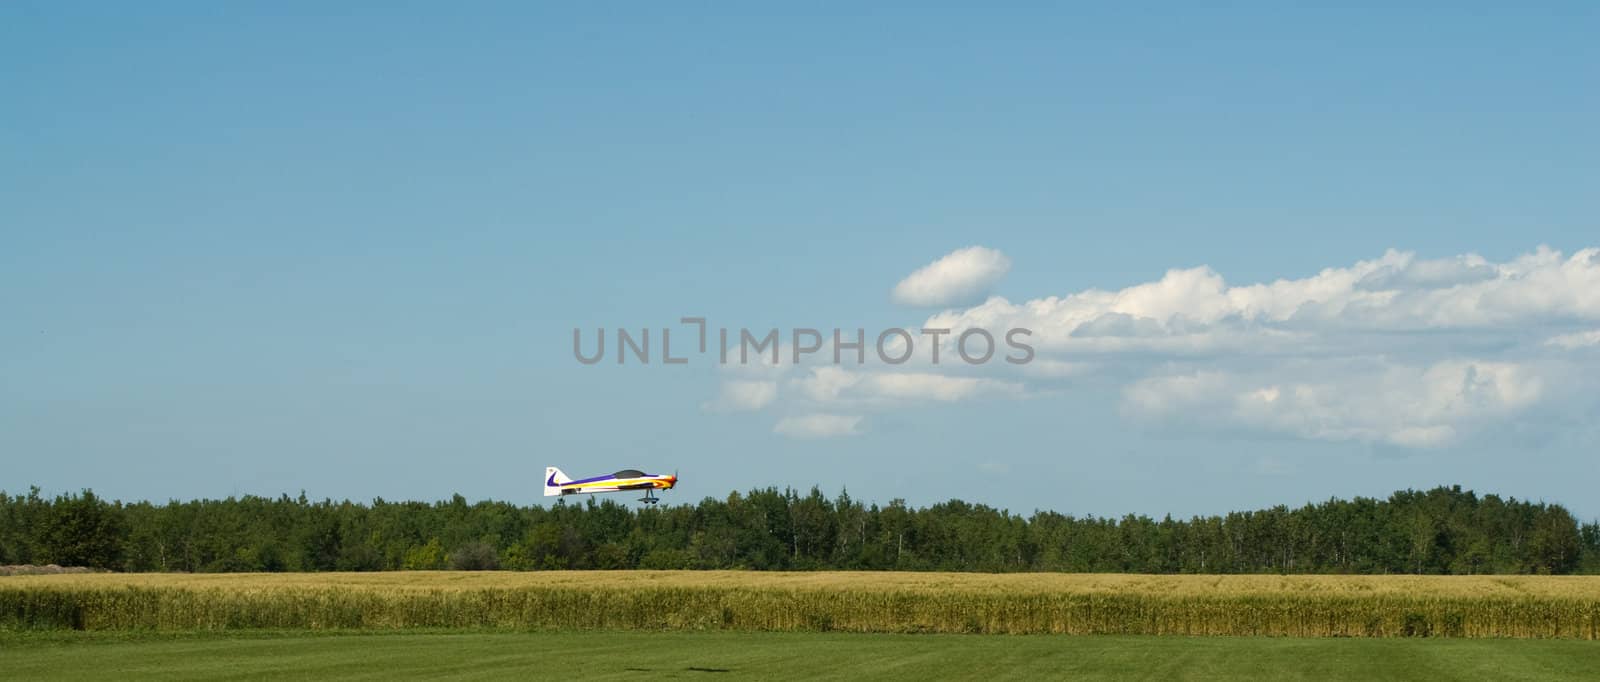 A small remote control plane coming in for a landing in a field